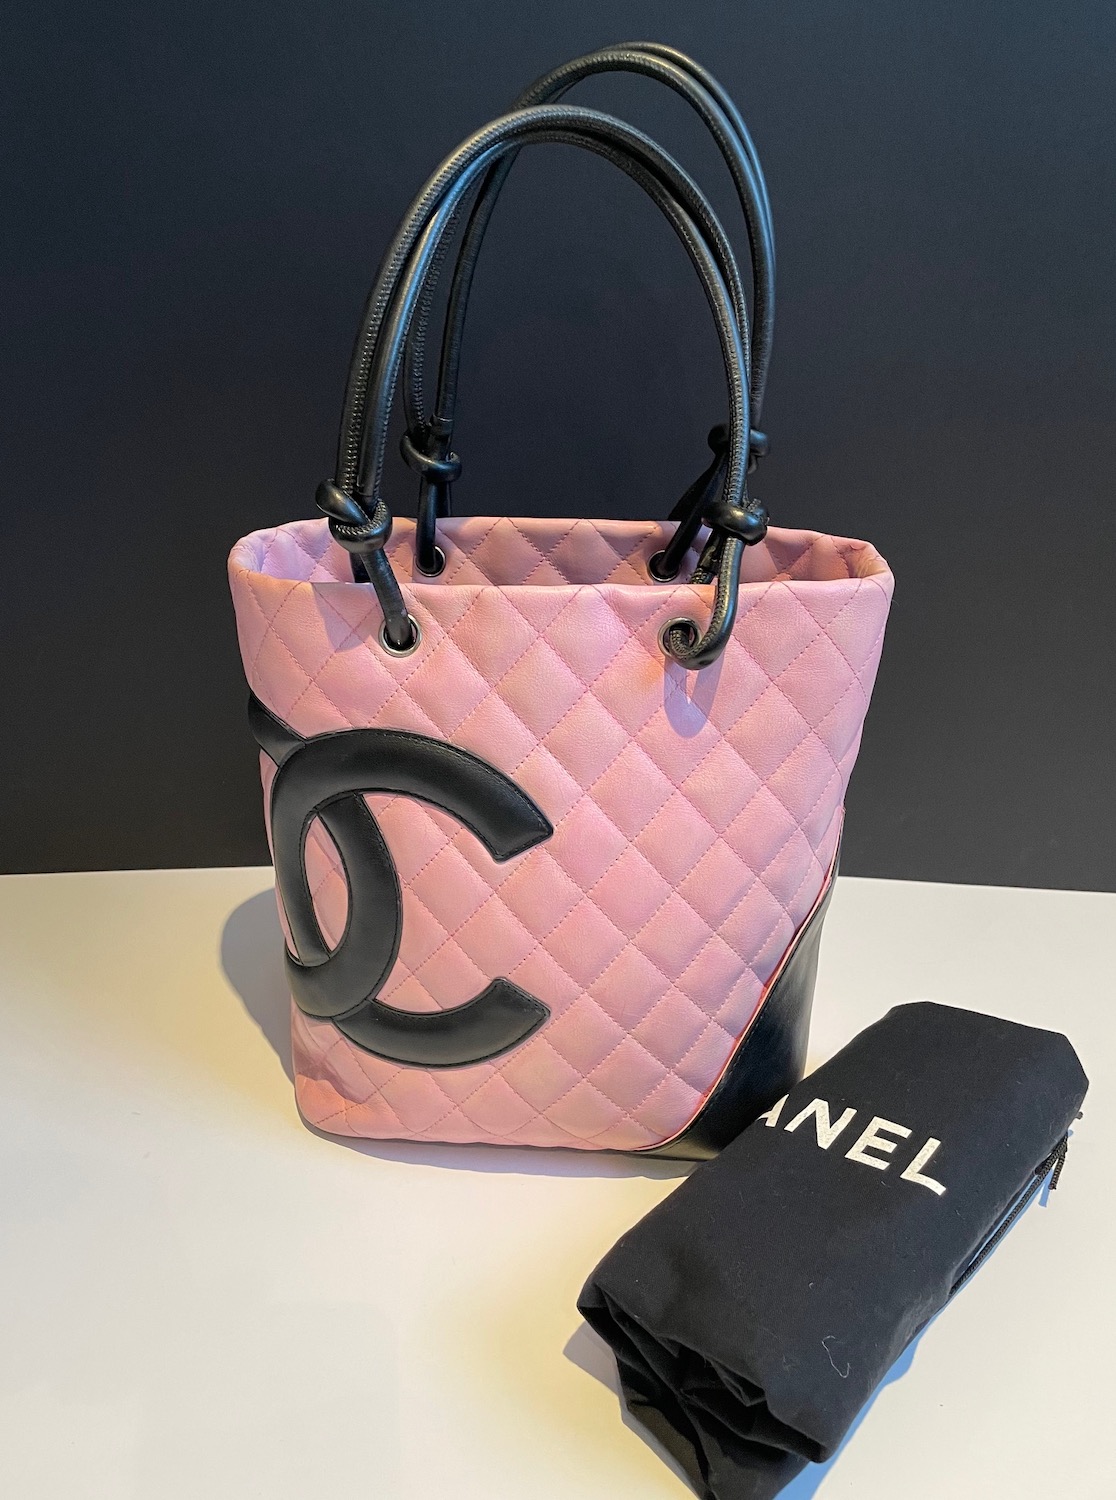 CHANEL Pink & Black Quilted Calfskin Leather Small Cambon CC Logo Bag C .2004-2005